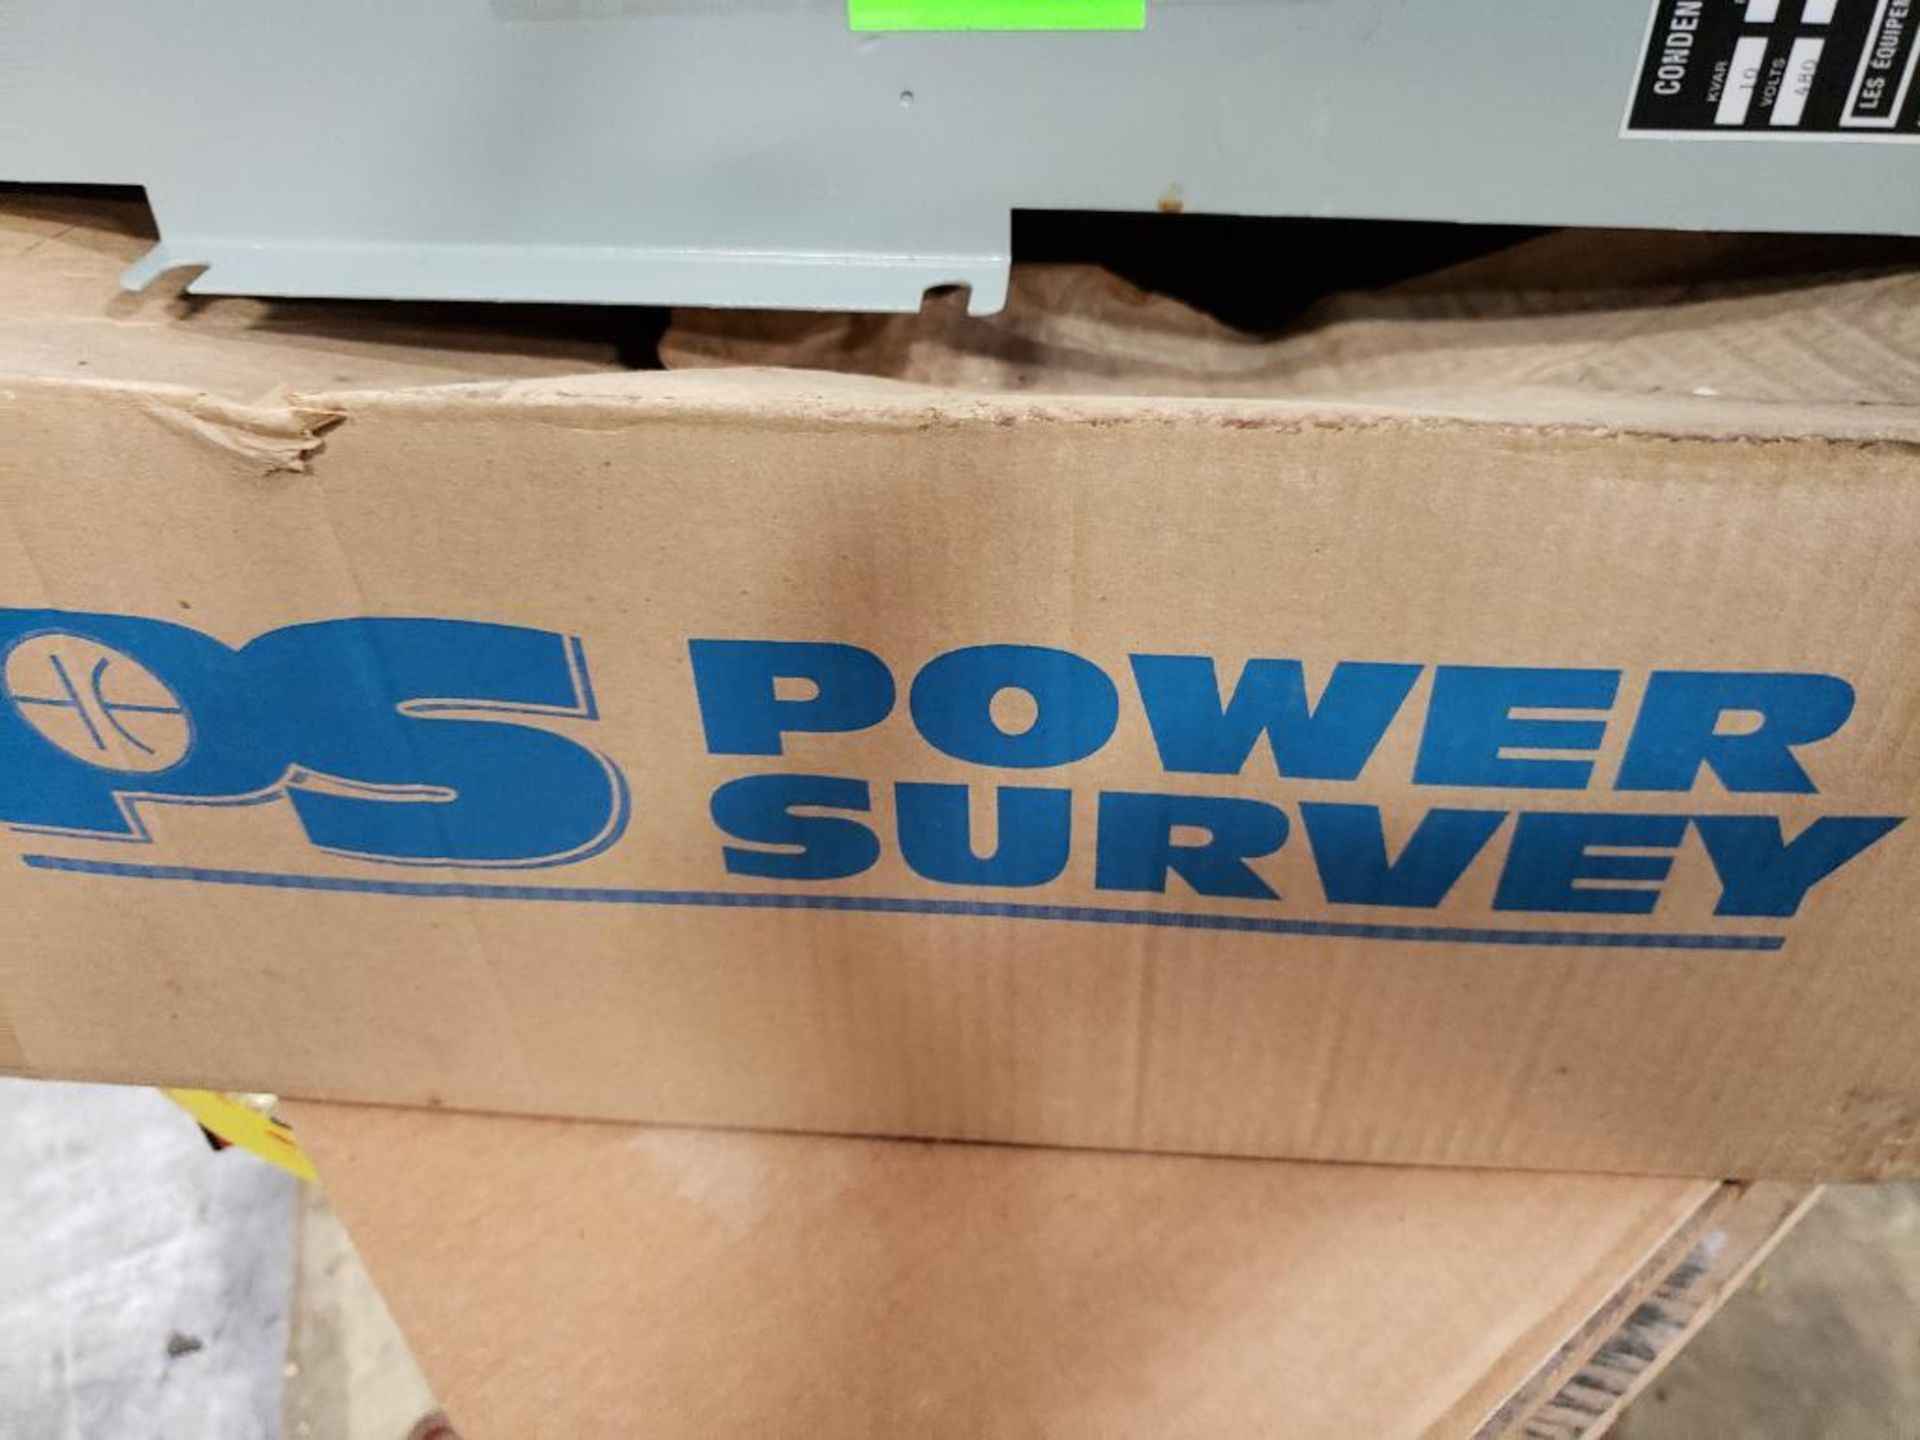 Power Survey PS4P10A capacitor. 3PH 480V. New with box. - Image 3 of 5